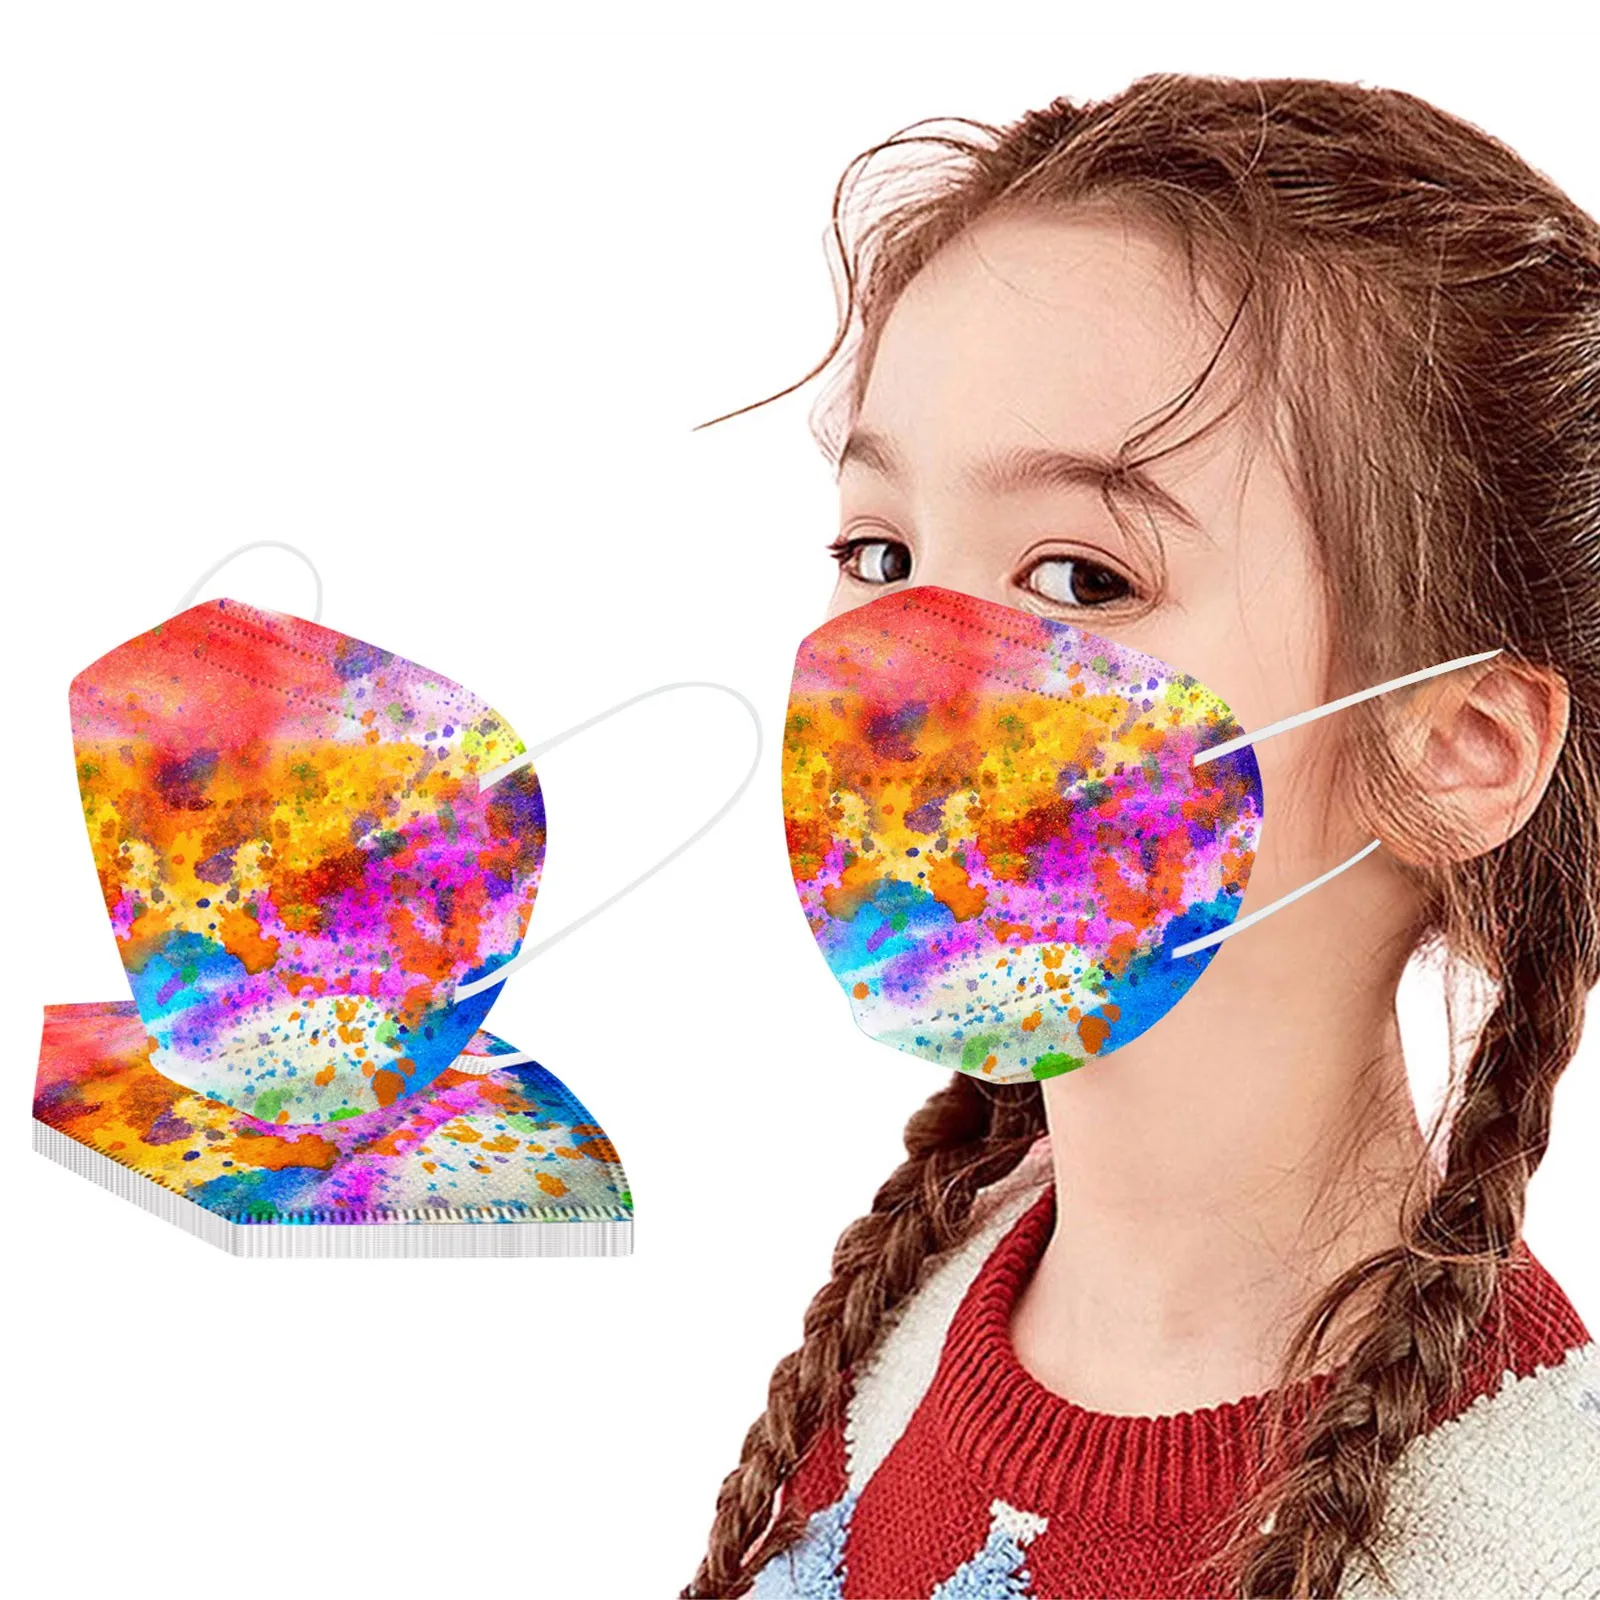 10PC Children's Mask Tie Dye Printing Mask Disposable Mask Industrial 5Ply Earloop Personal Face Mask Mascarillas Halloween cute halloween costumes